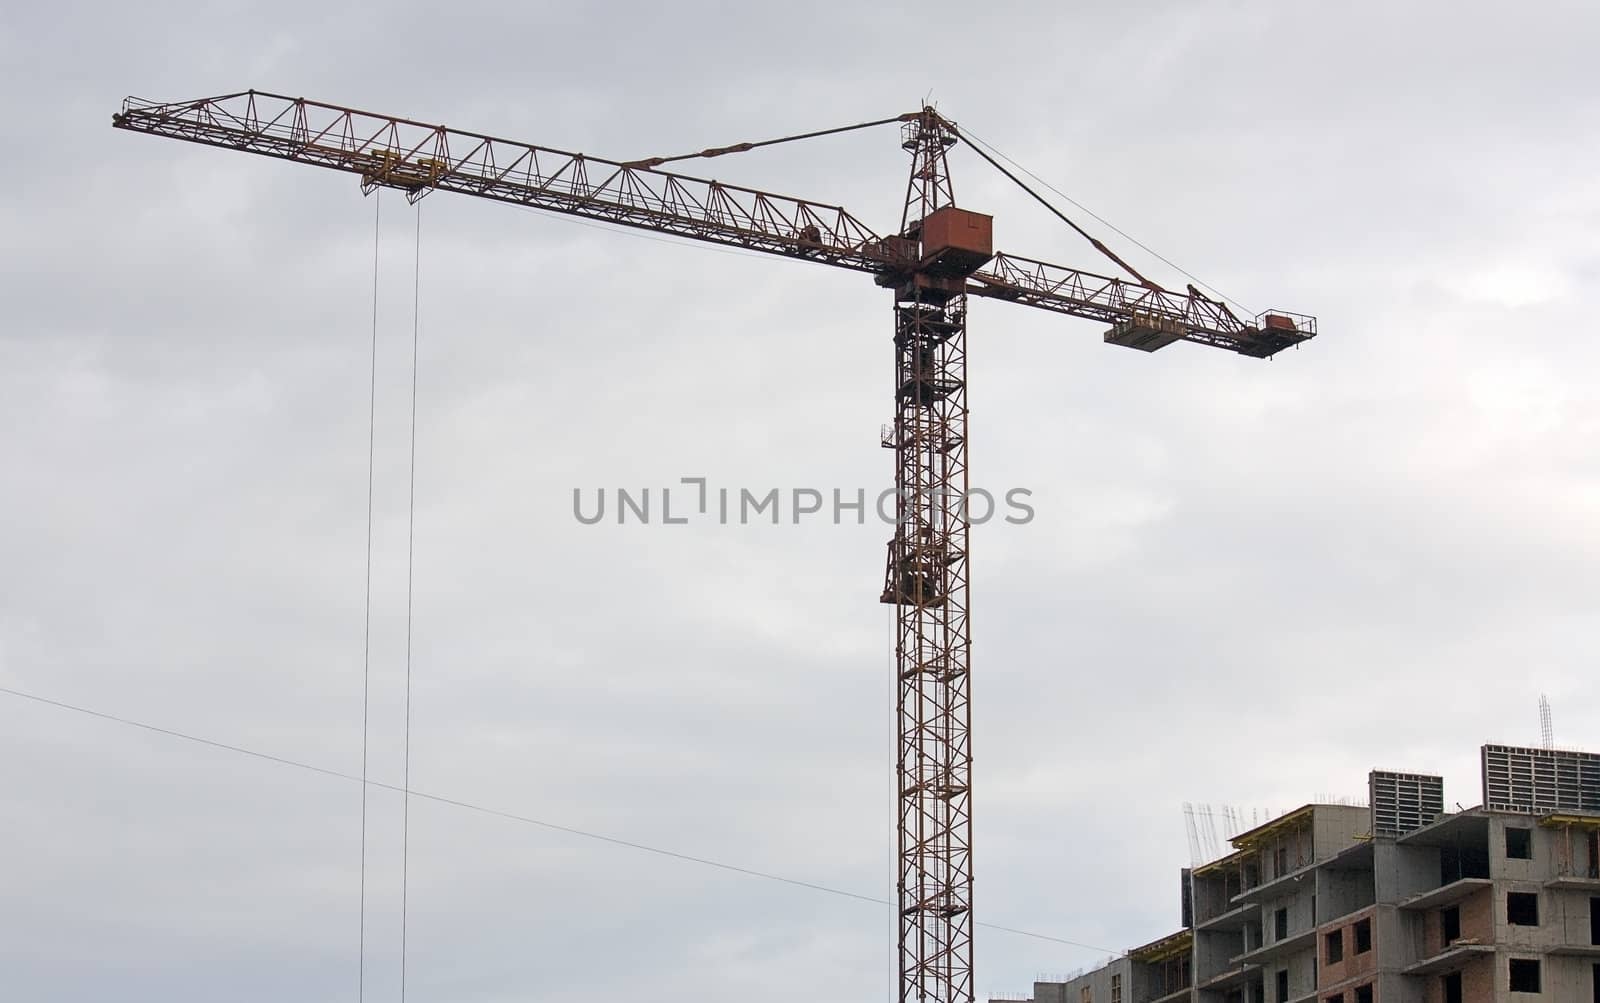 Tower crane near the house under construction on the background of a cloudy sky.